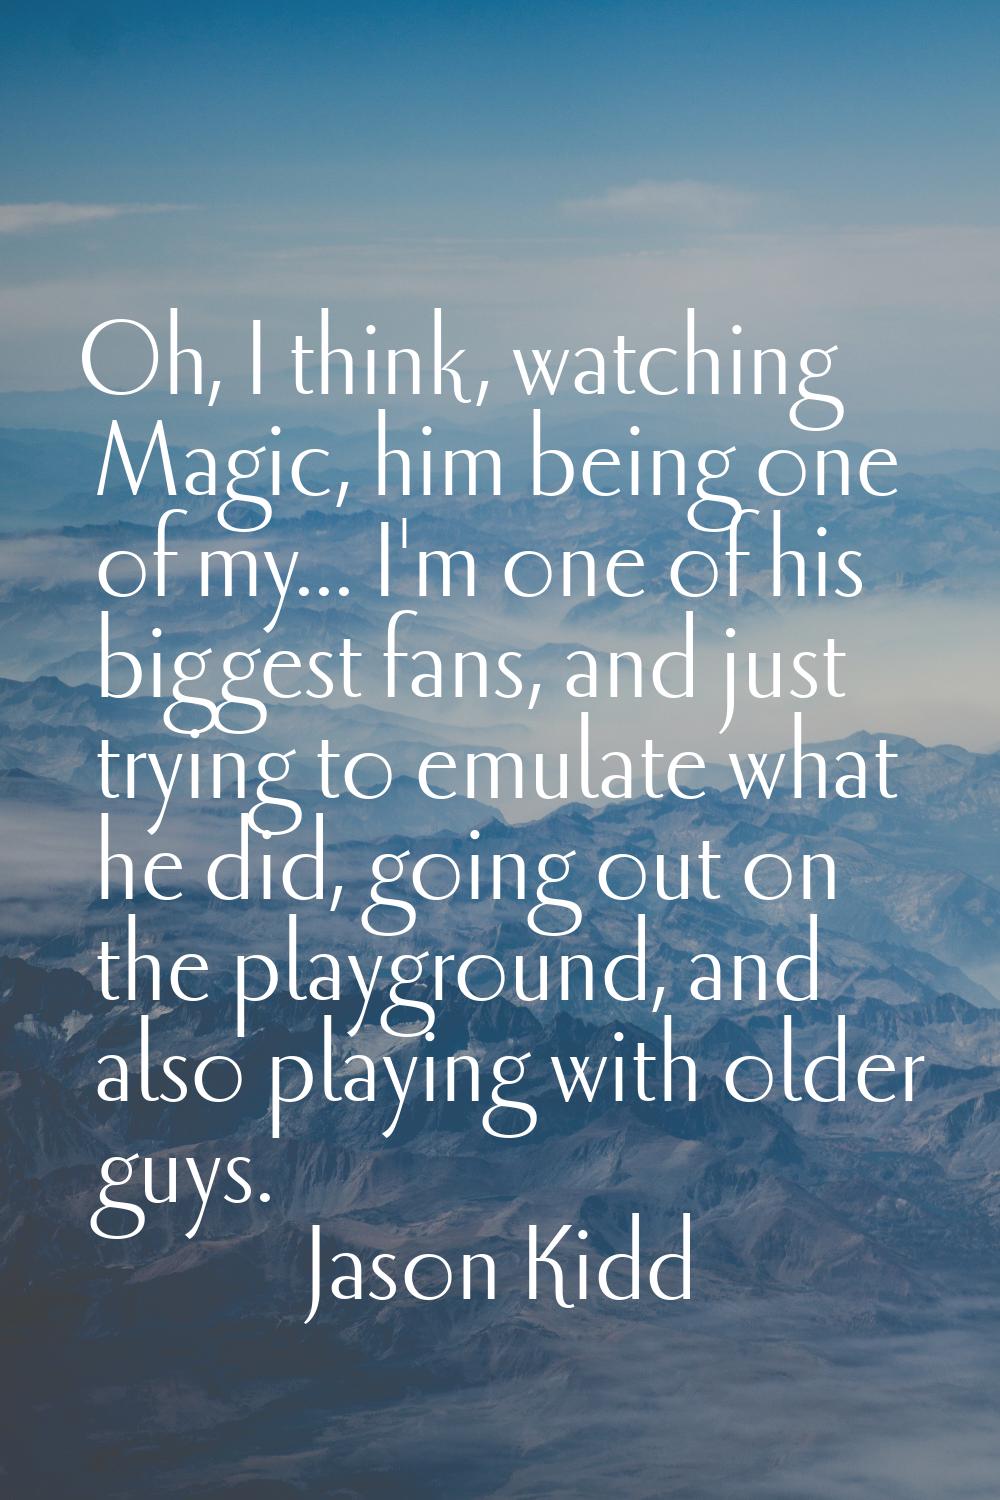 Oh, I think, watching Magic, him being one of my... I'm one of his biggest fans, and just trying to